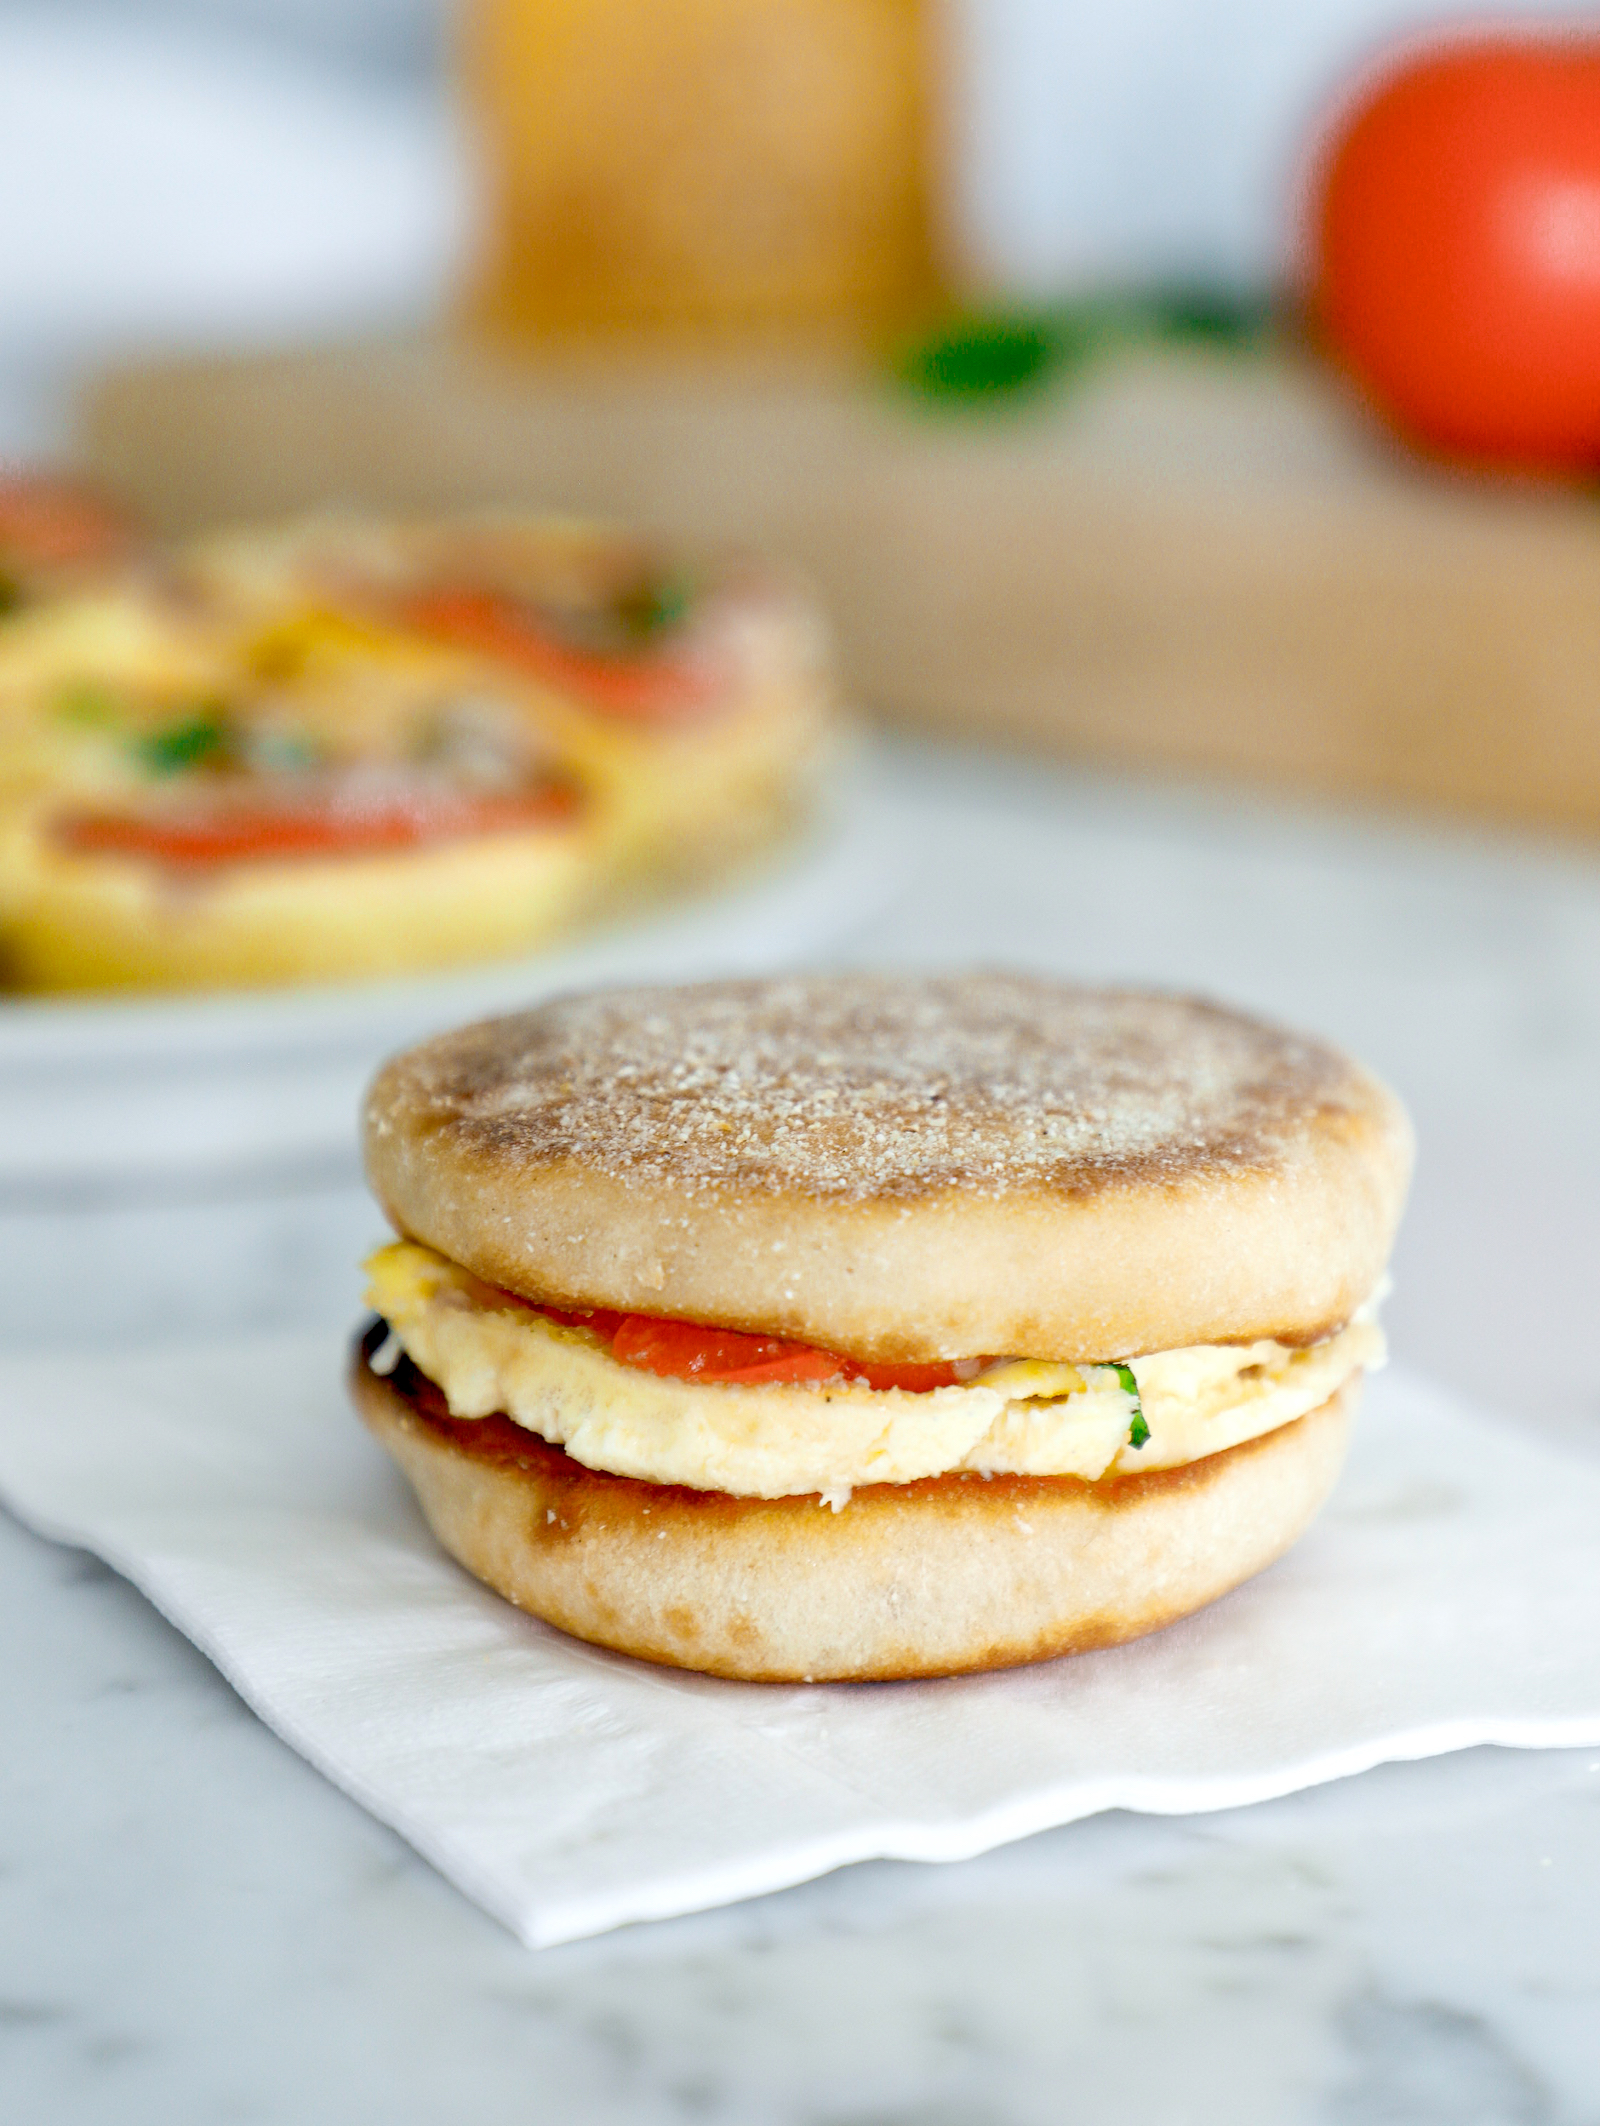 A high protein egg bite sandwiched between two halves of a toasted English muffin on a white napkin. 